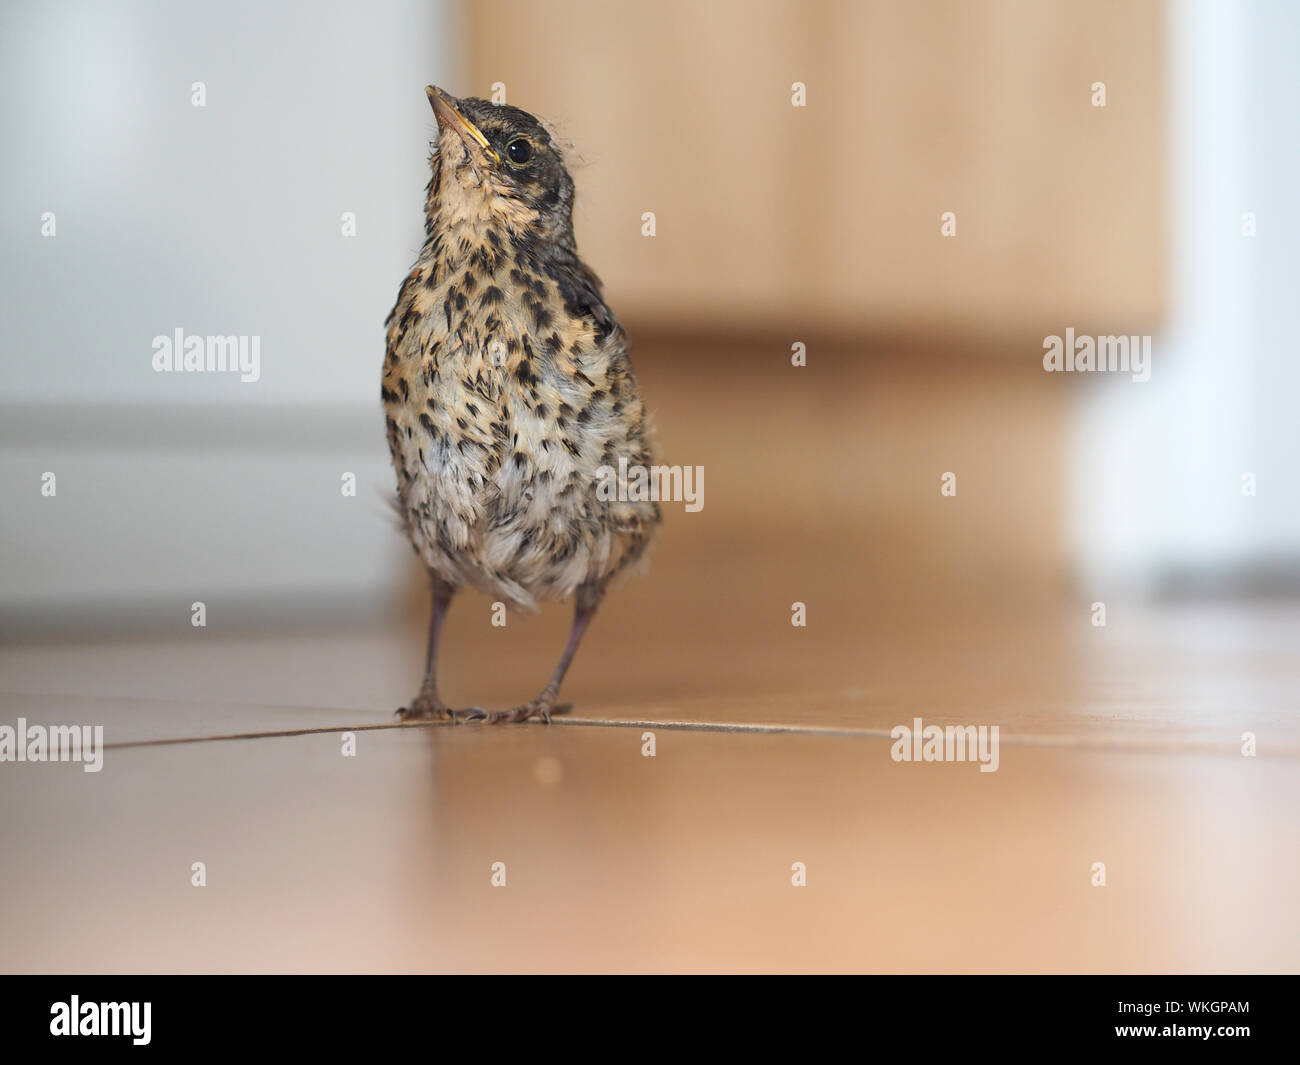 Close-up Of Young Bird Perching On Tiled Floor Stock Photo